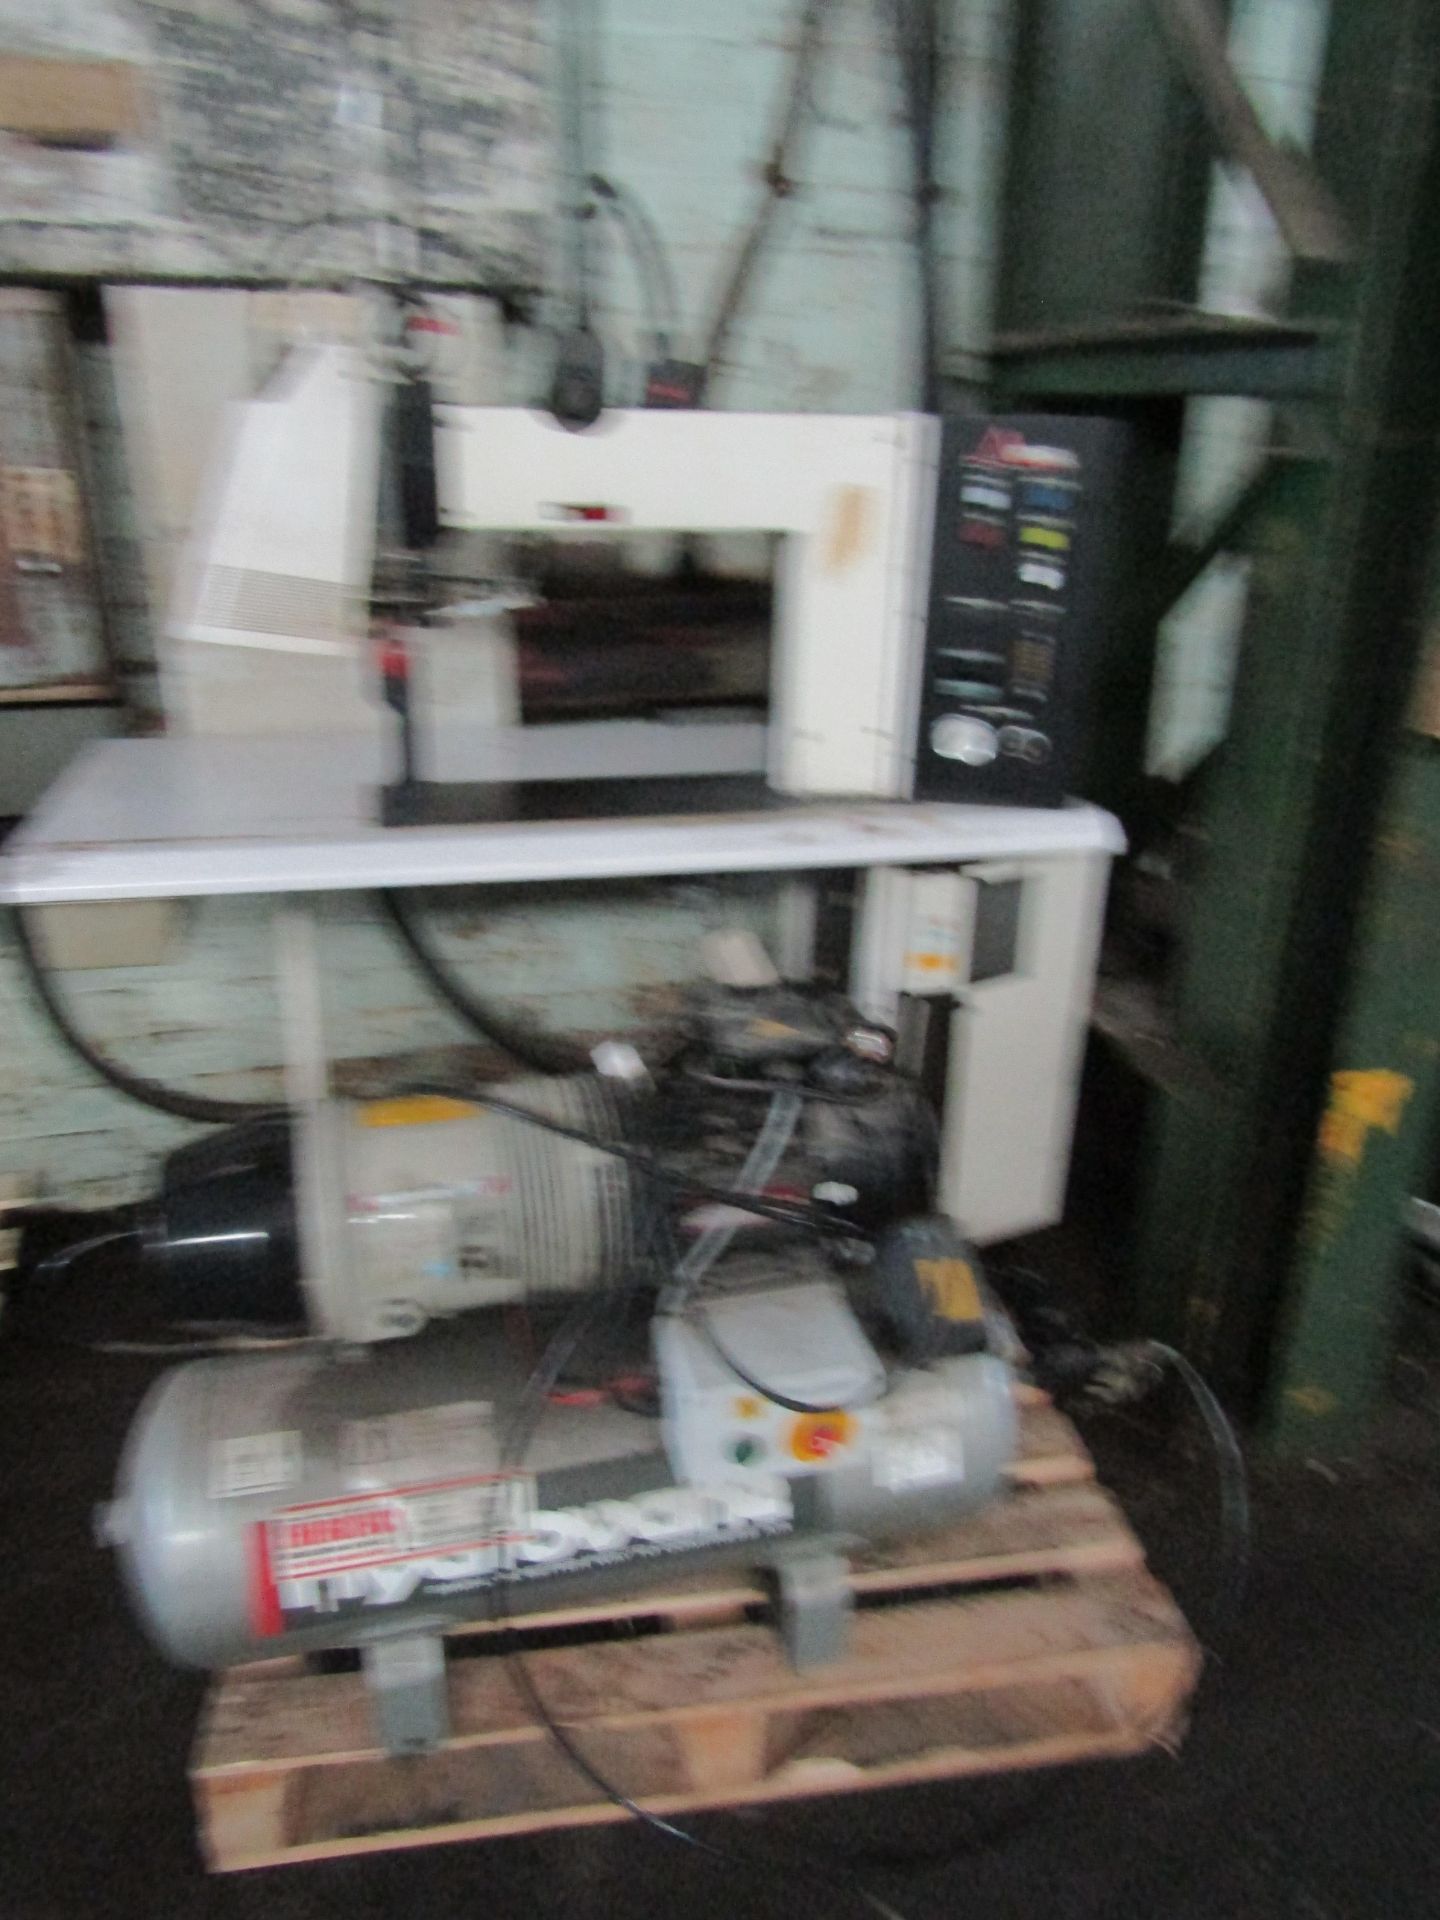 Ardmel tape seam sealer machine with Hydrovane 501 compressor. the business it was removed from says